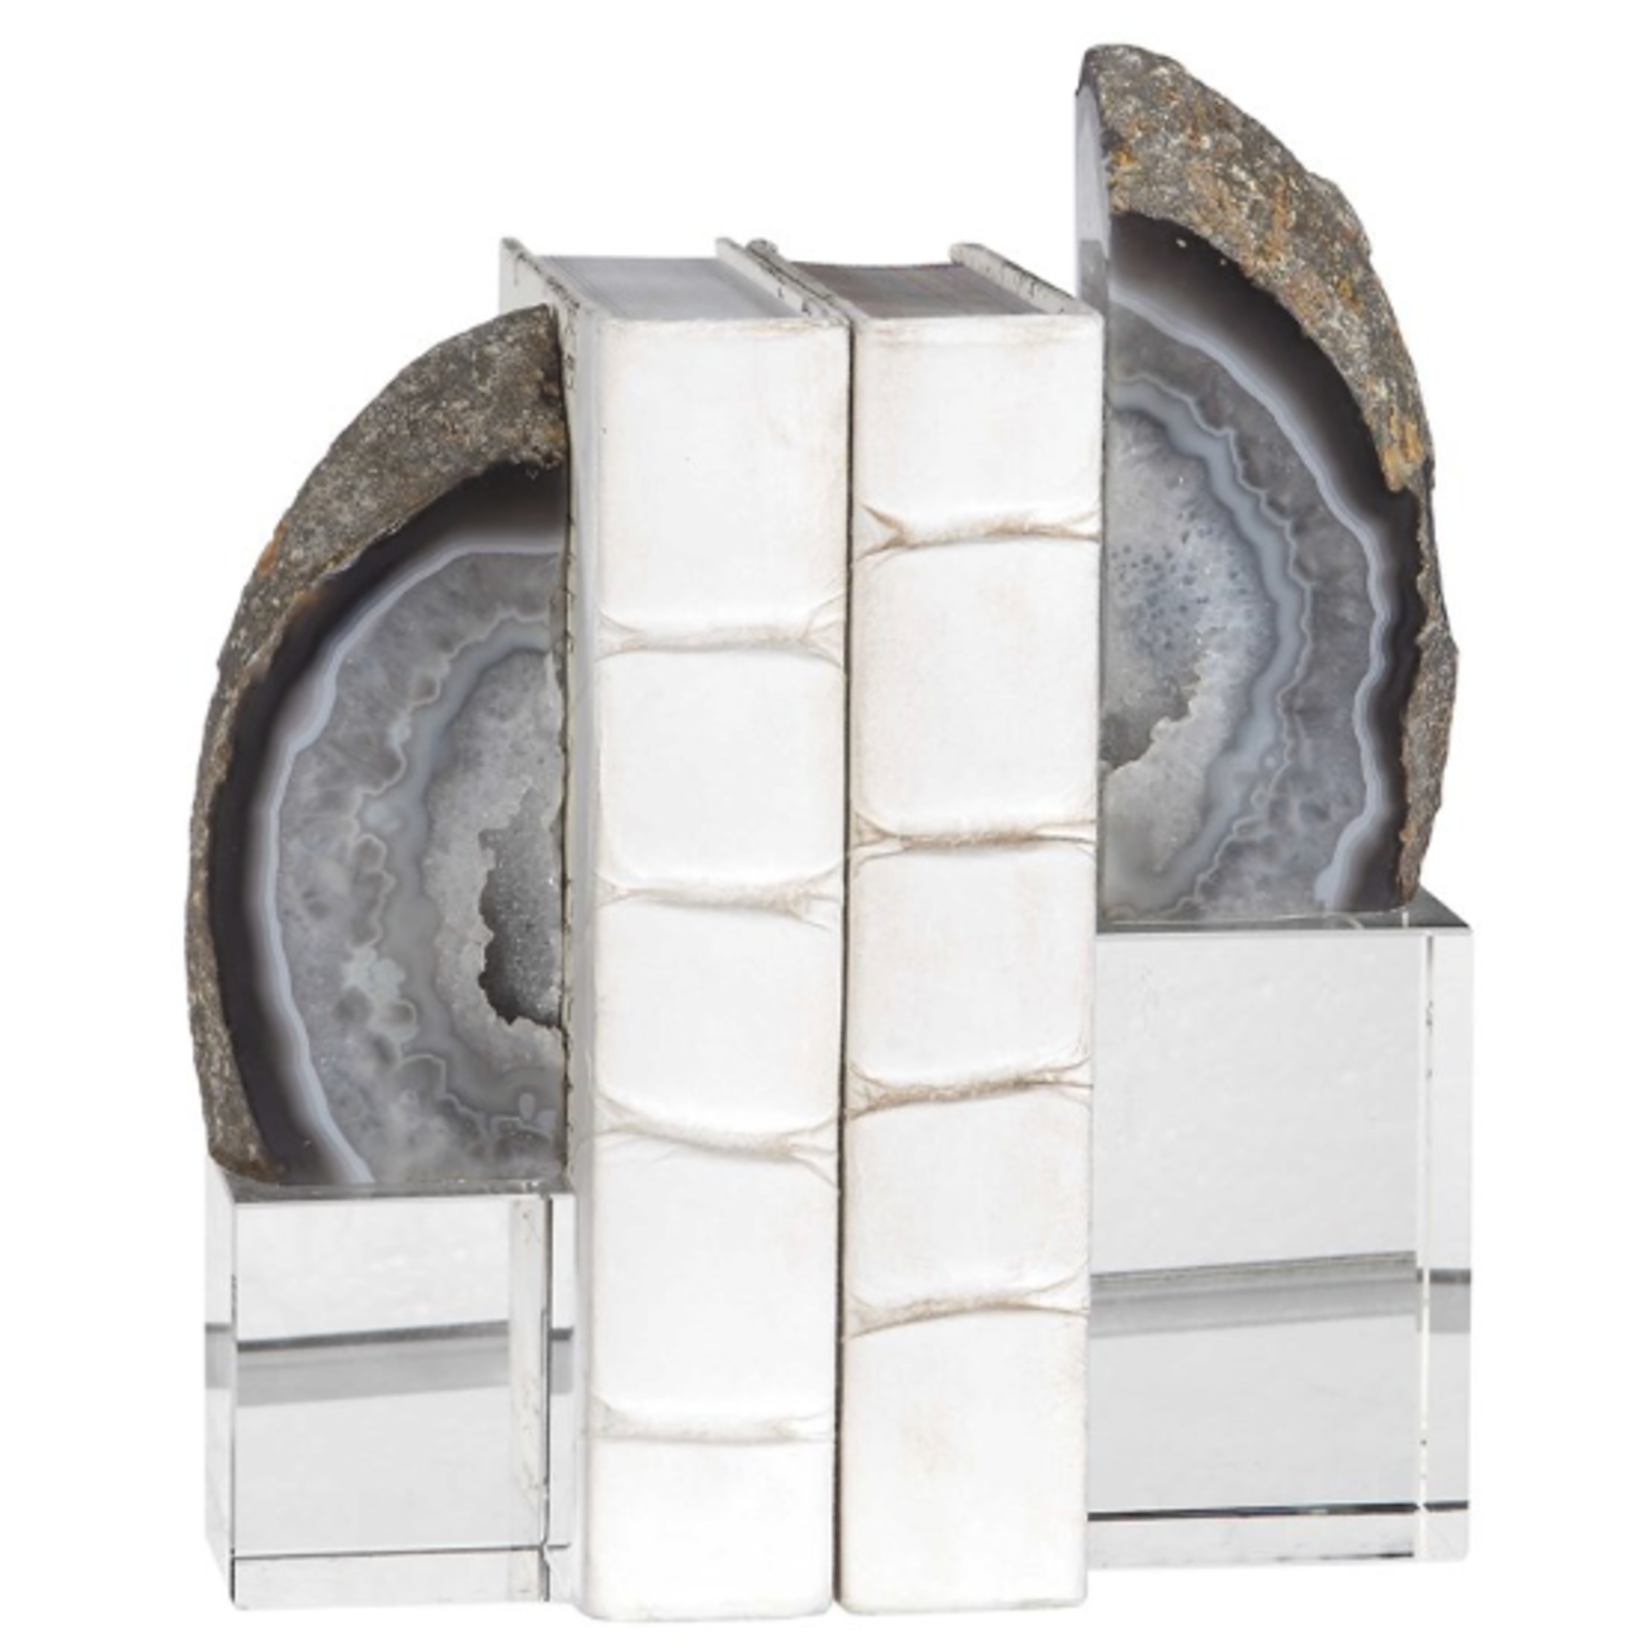 Outside The Box 13" & 11" Set Of 2 Amiya Gray Marble Unfinished Edge Bookends